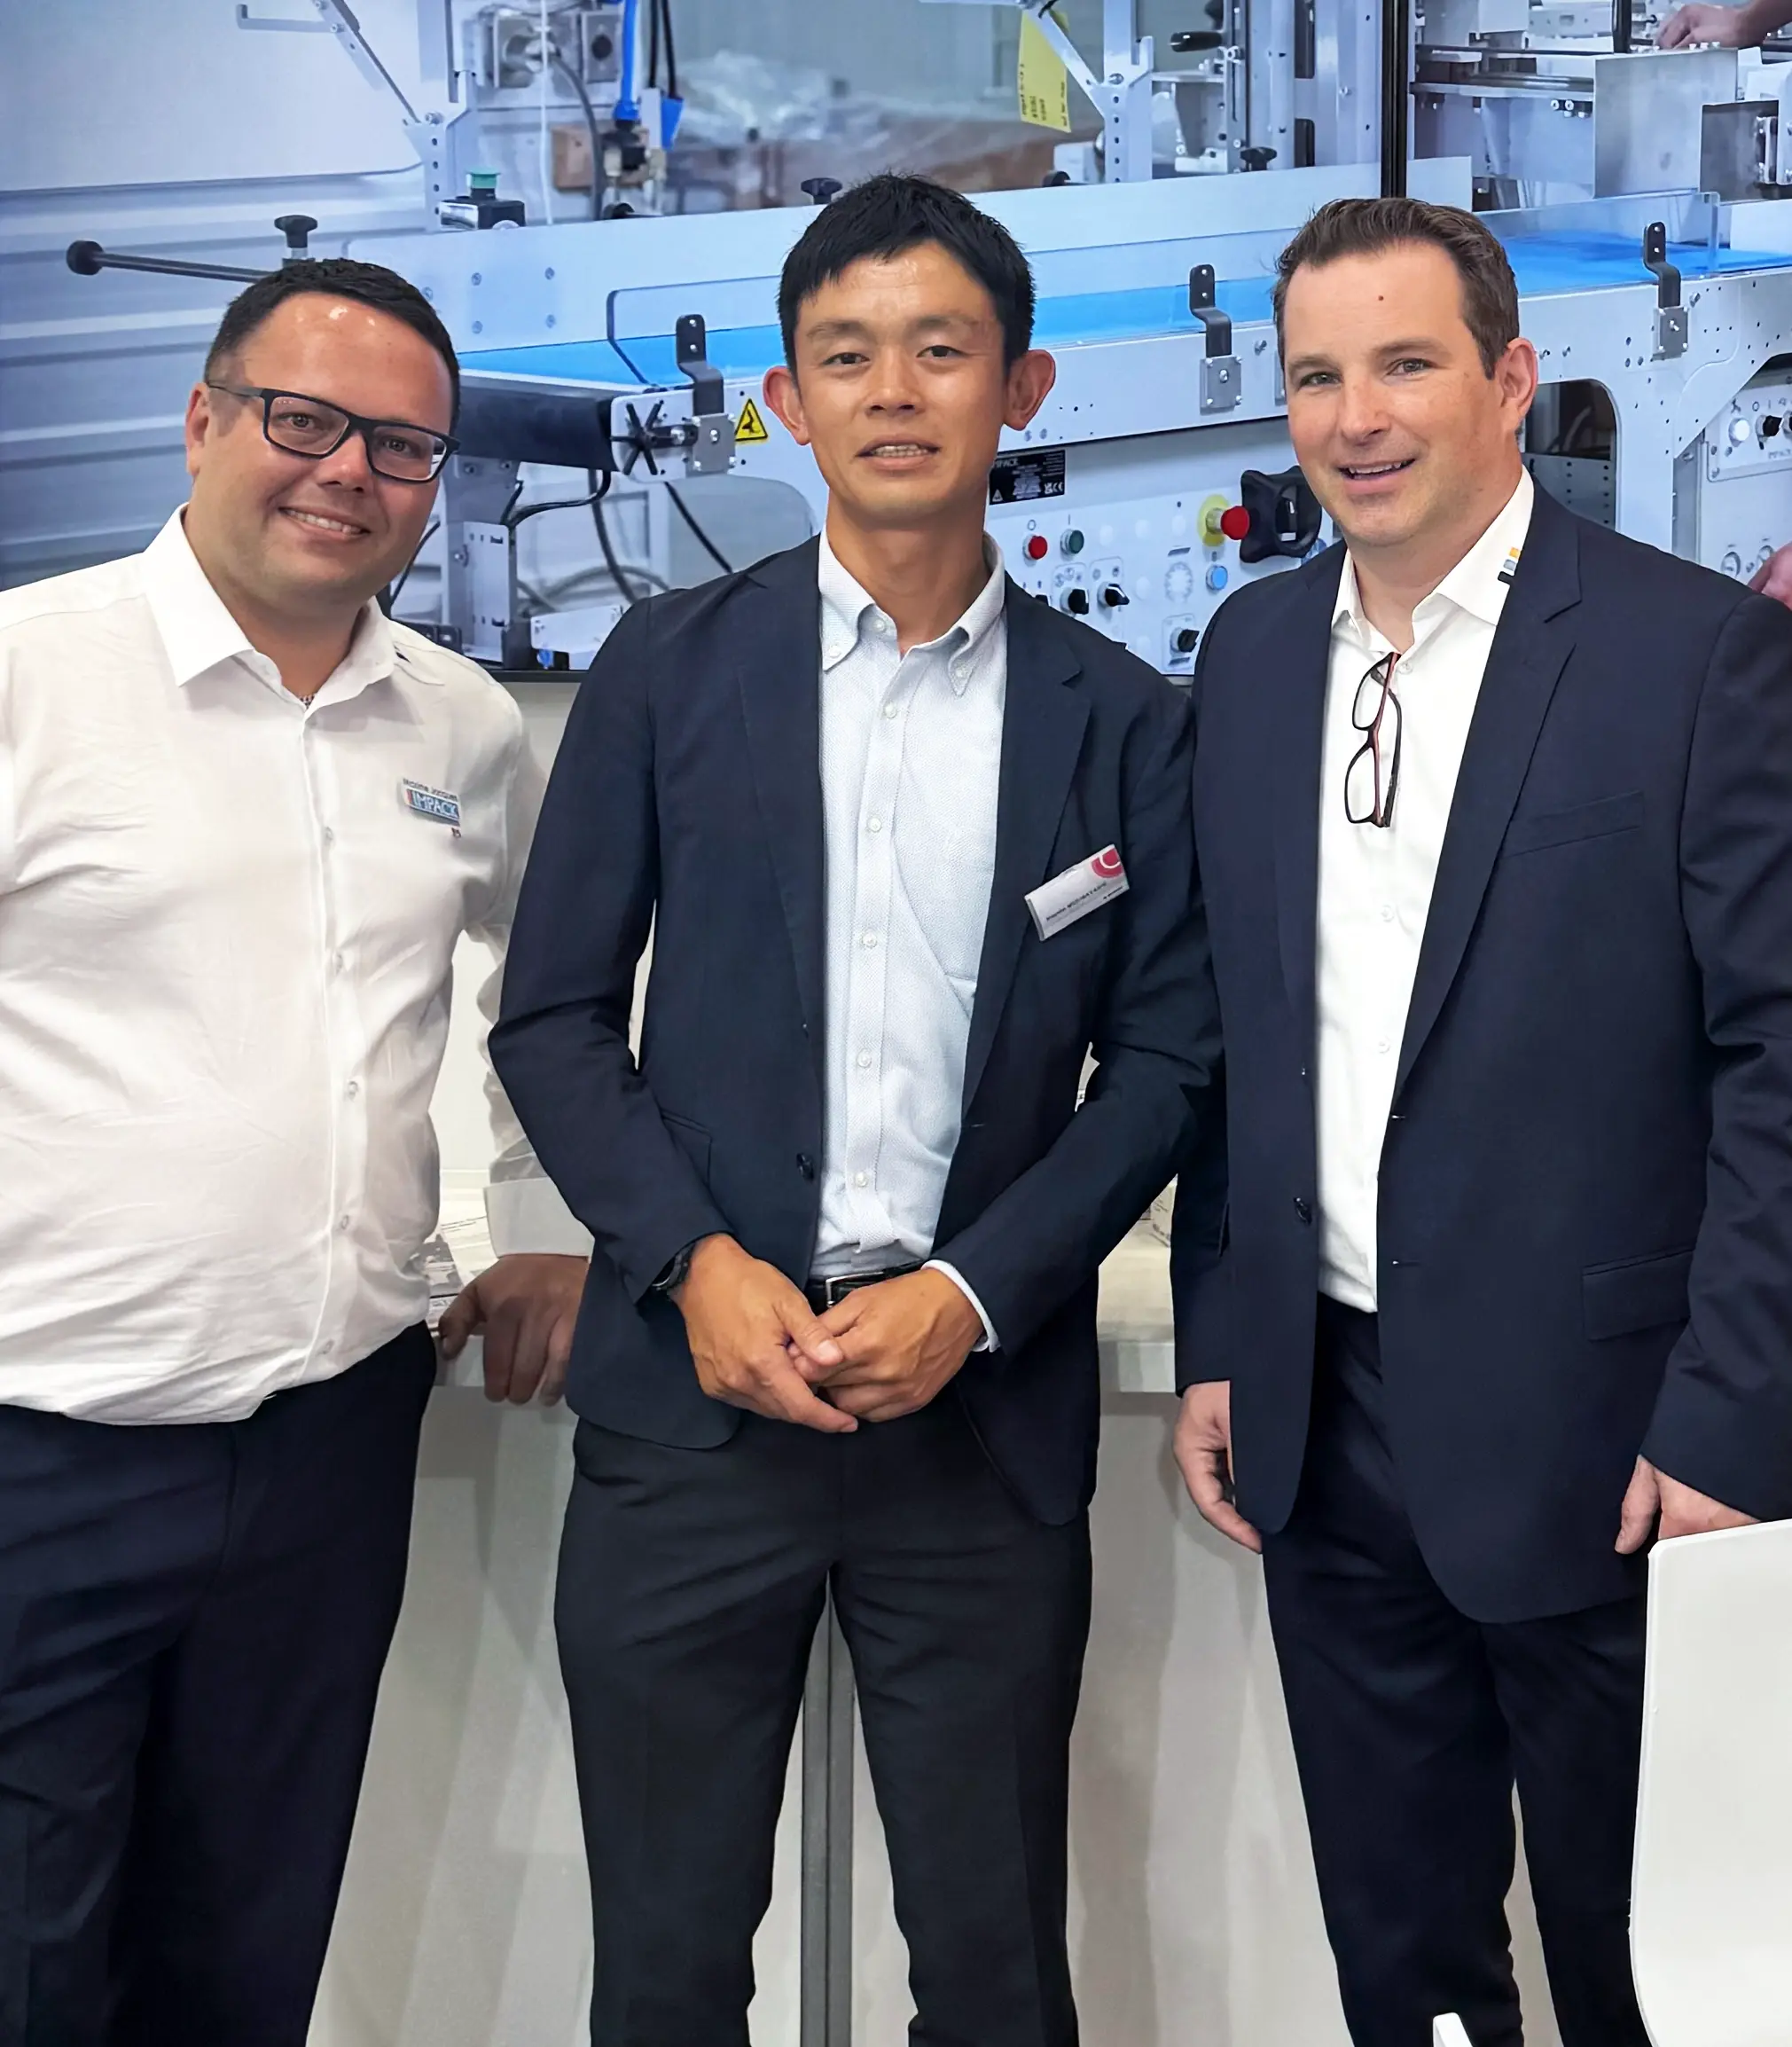 maxime, Bobst Japan's Hayato and Dominic pose for a photo